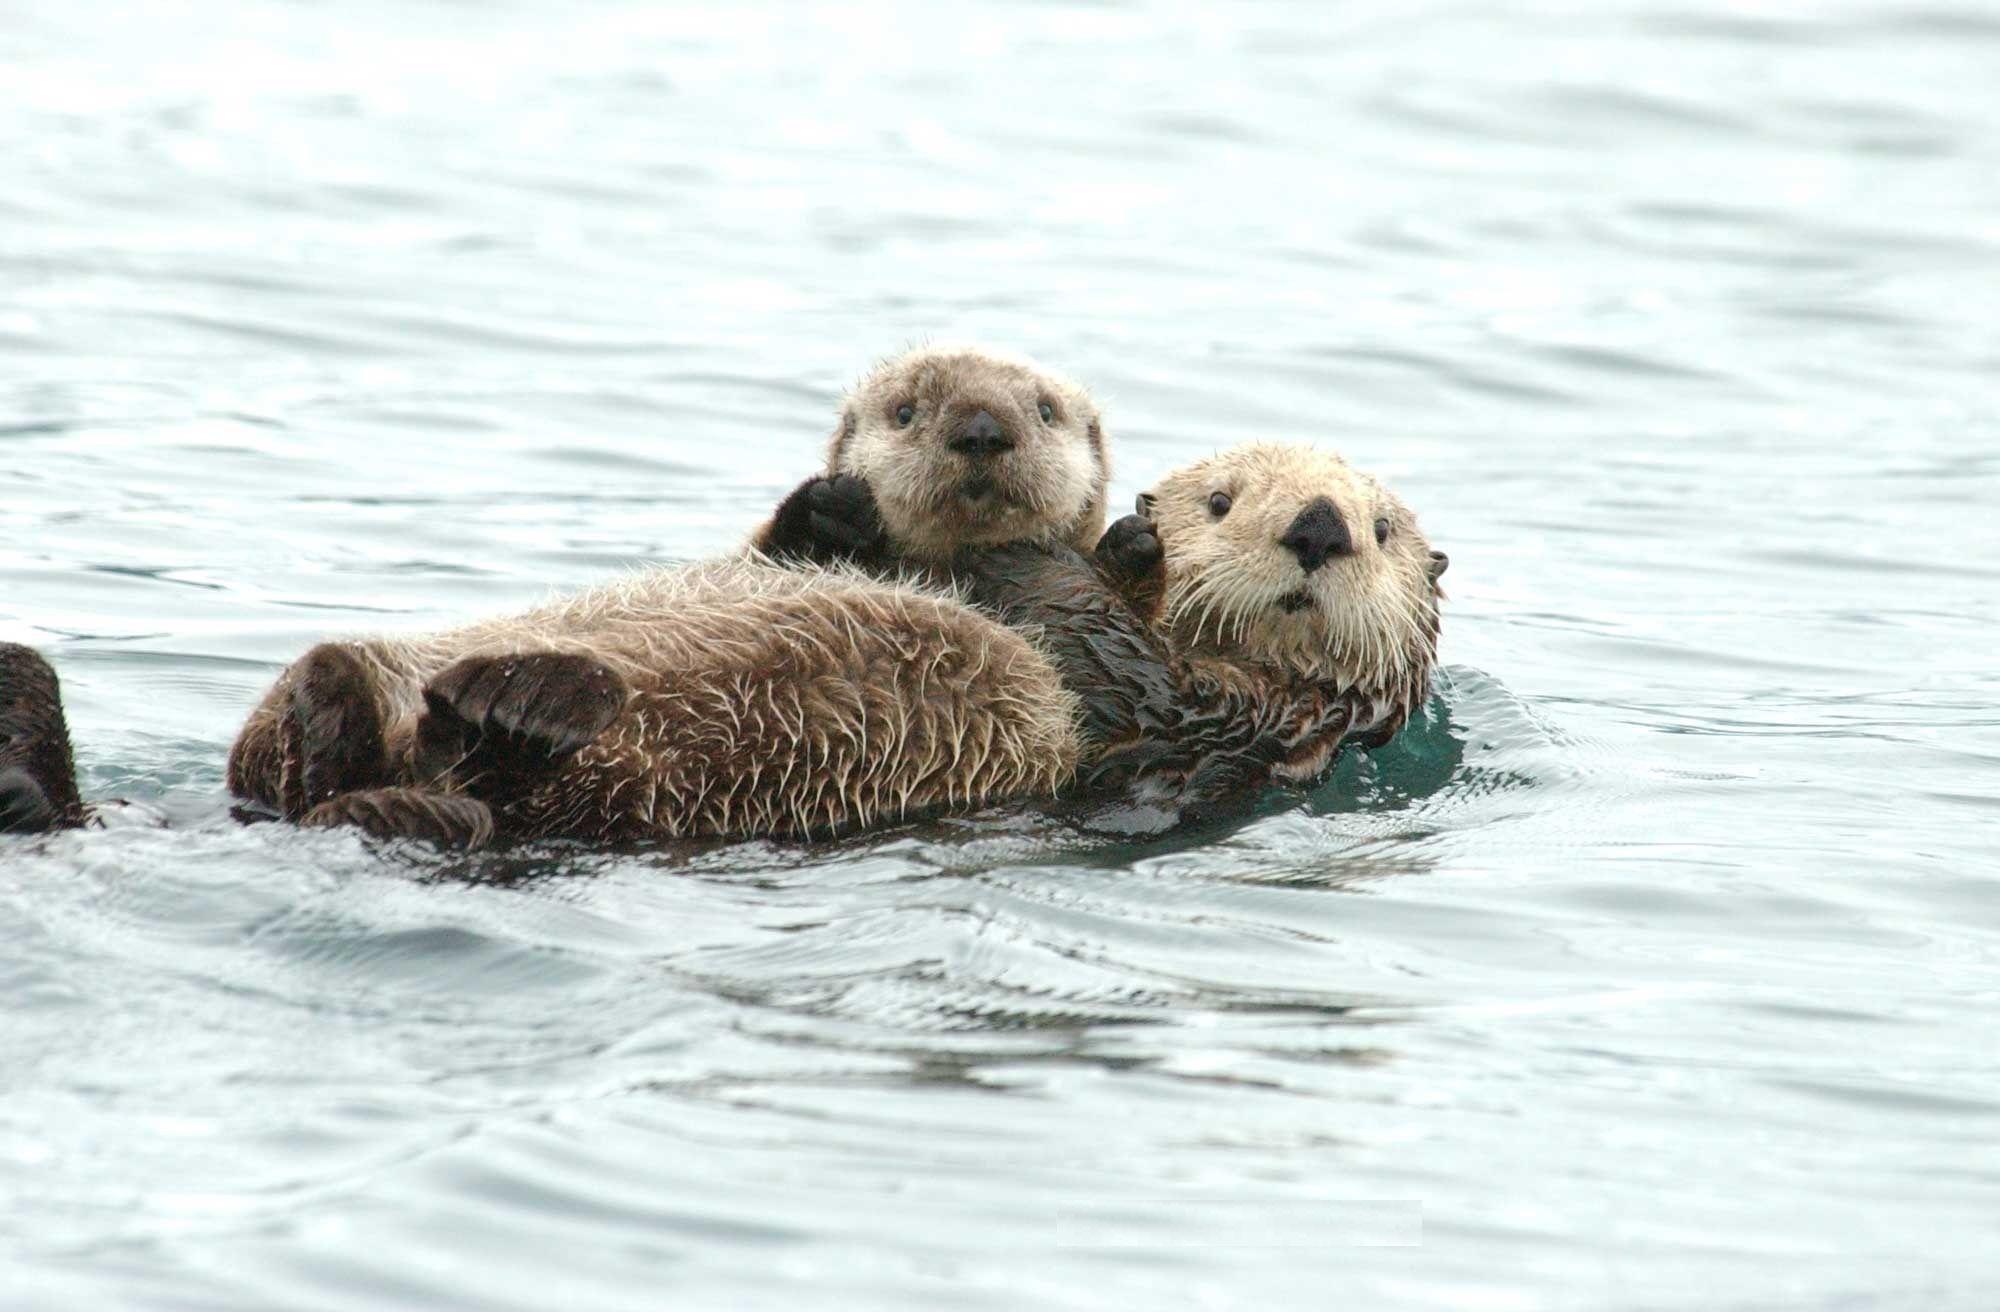 Cute Sea Otter Wallpapers - Top Free Cute Sea Otter Backgrounds ...